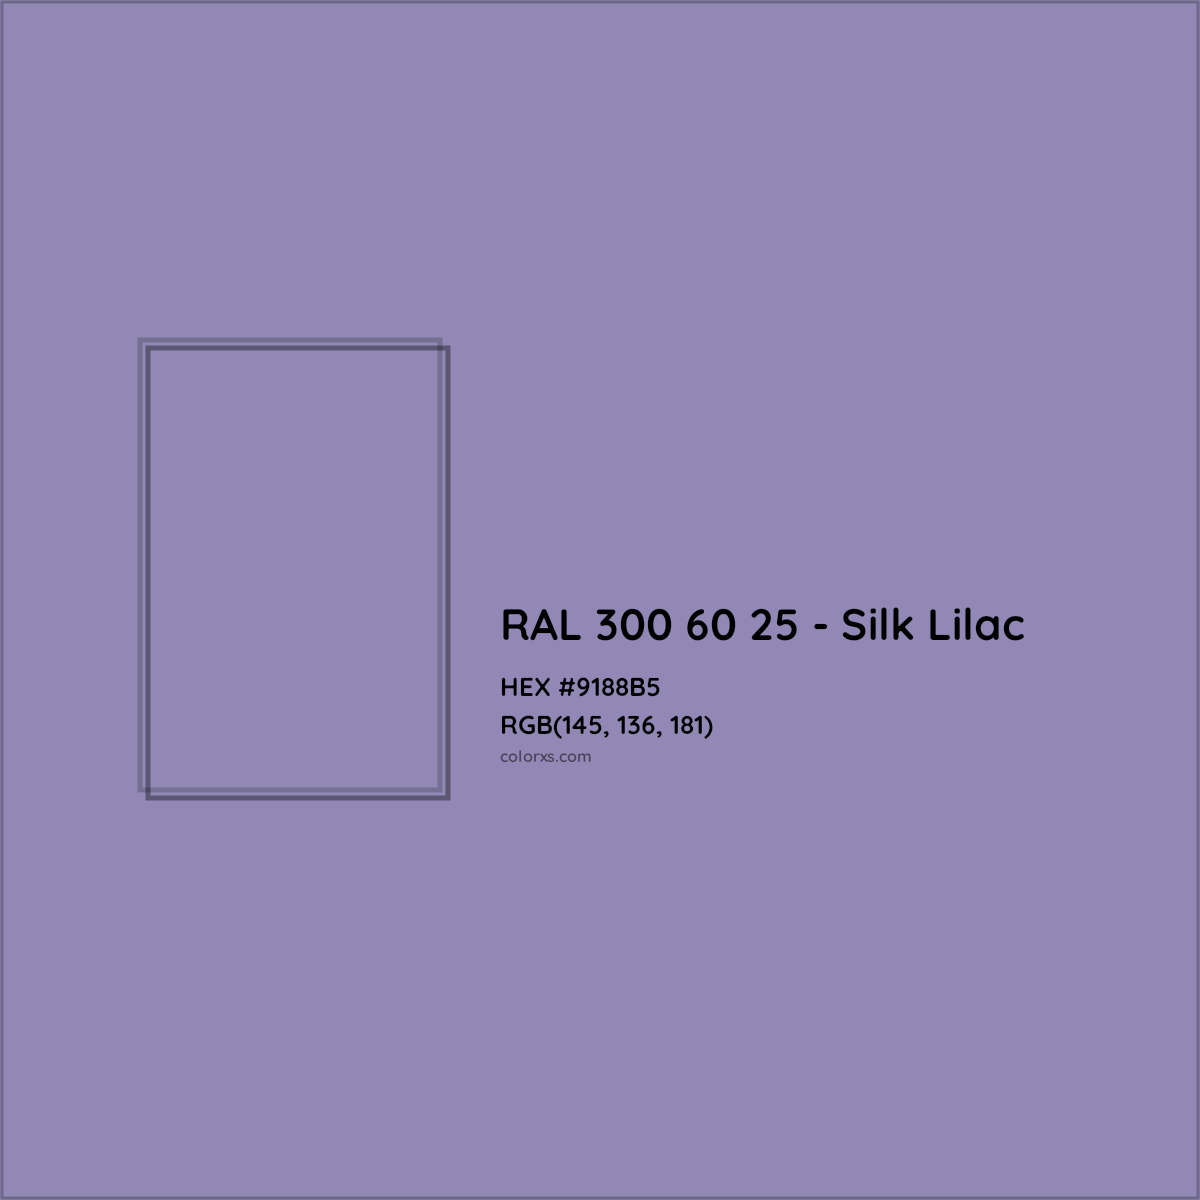 HEX #9188B5 RAL 300 60 25 - Silk Lilac CMS RAL Design - Color Code